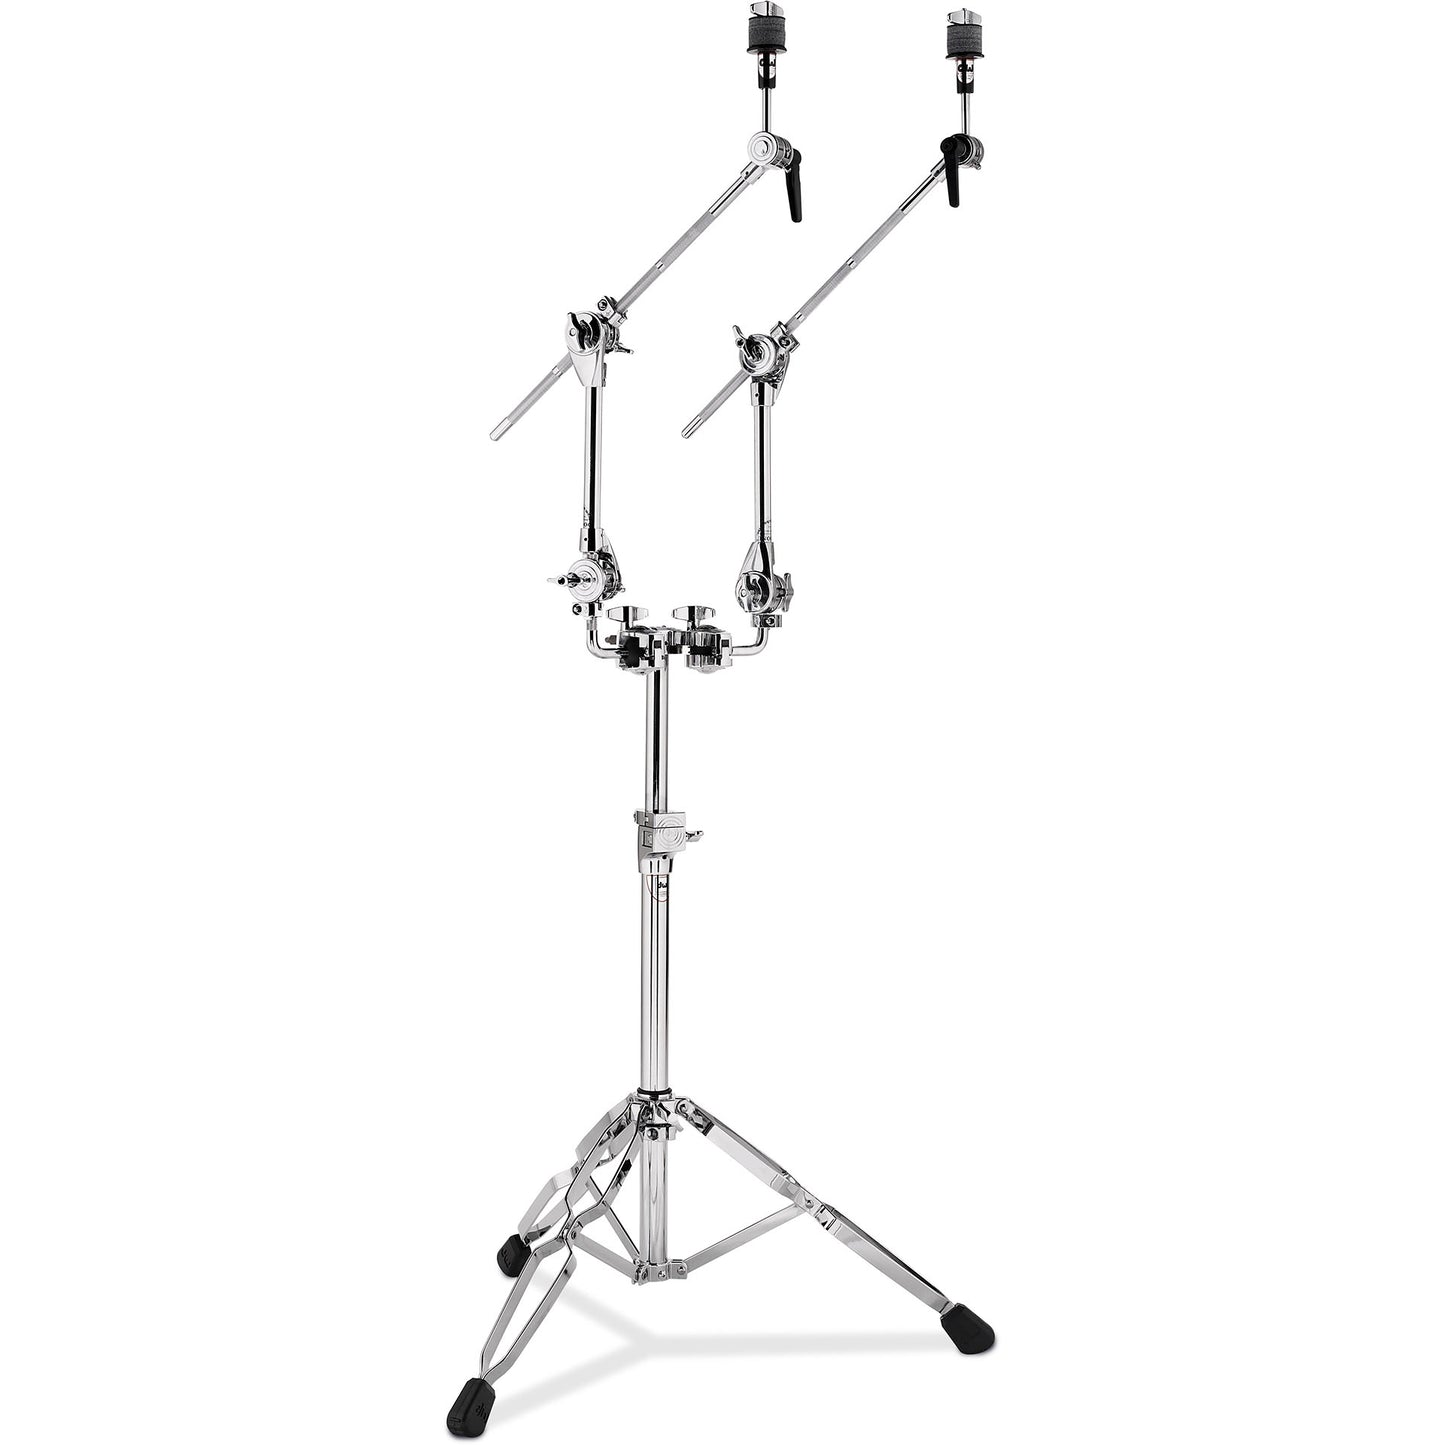 Drum Workshop 9799 Double Cymbal Stand